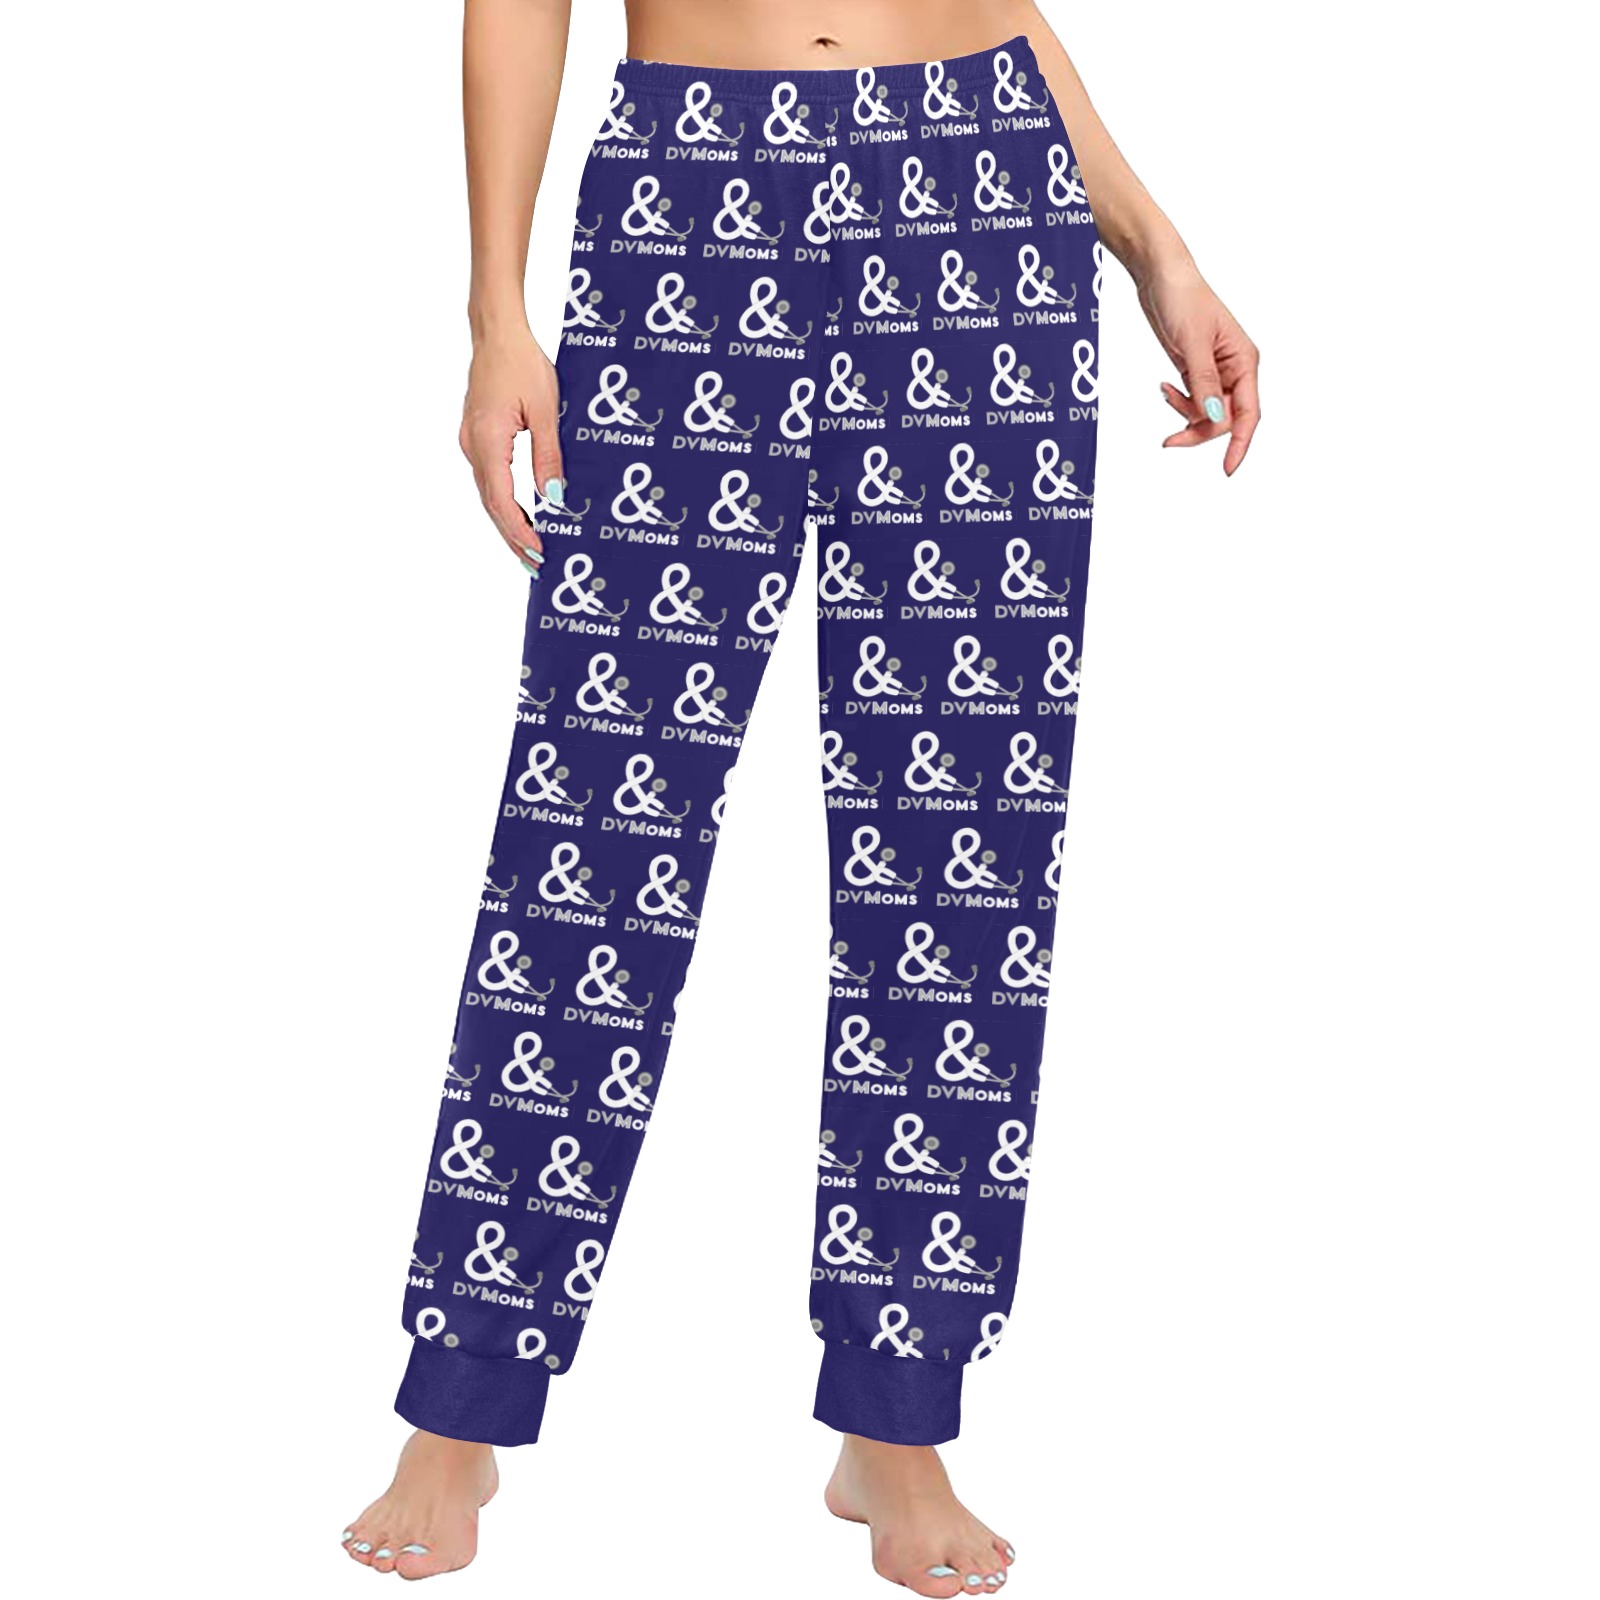 Navy pants all over logo Women's All Over Print Pajama Trousers